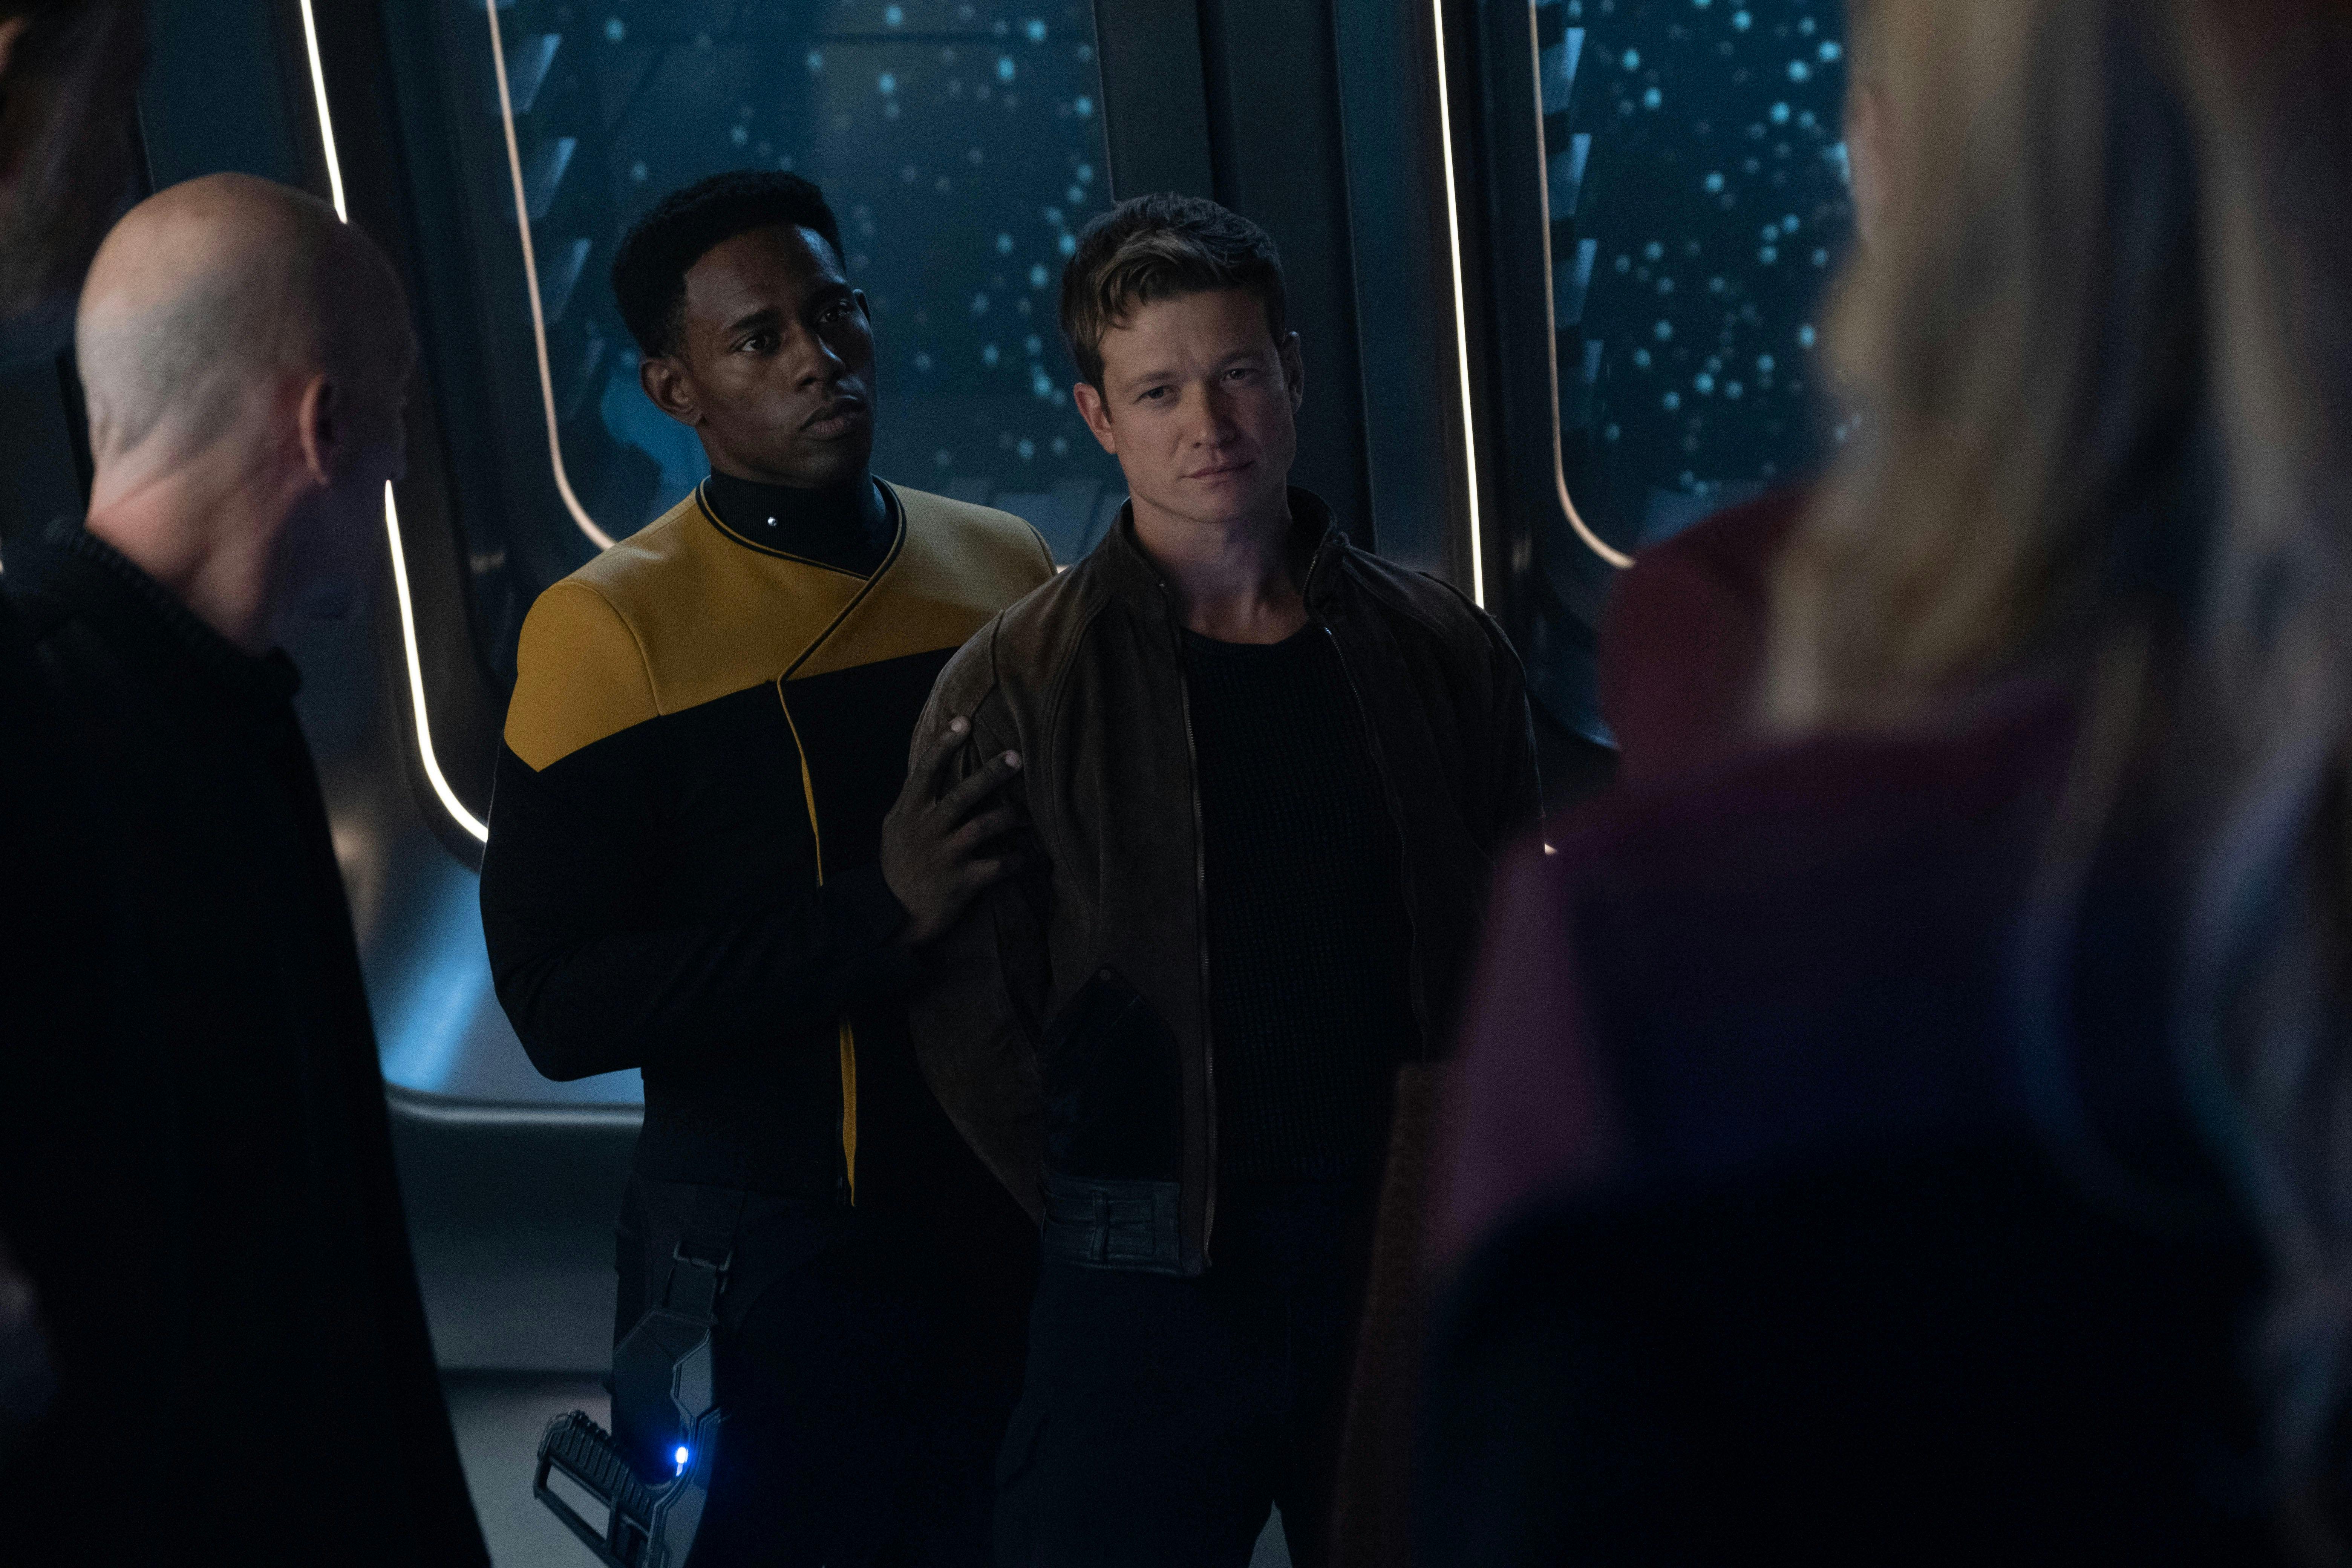 In the Observation Lounge, Security has arrived to take Jack Crusher to the brig as Picard and Seven looks on